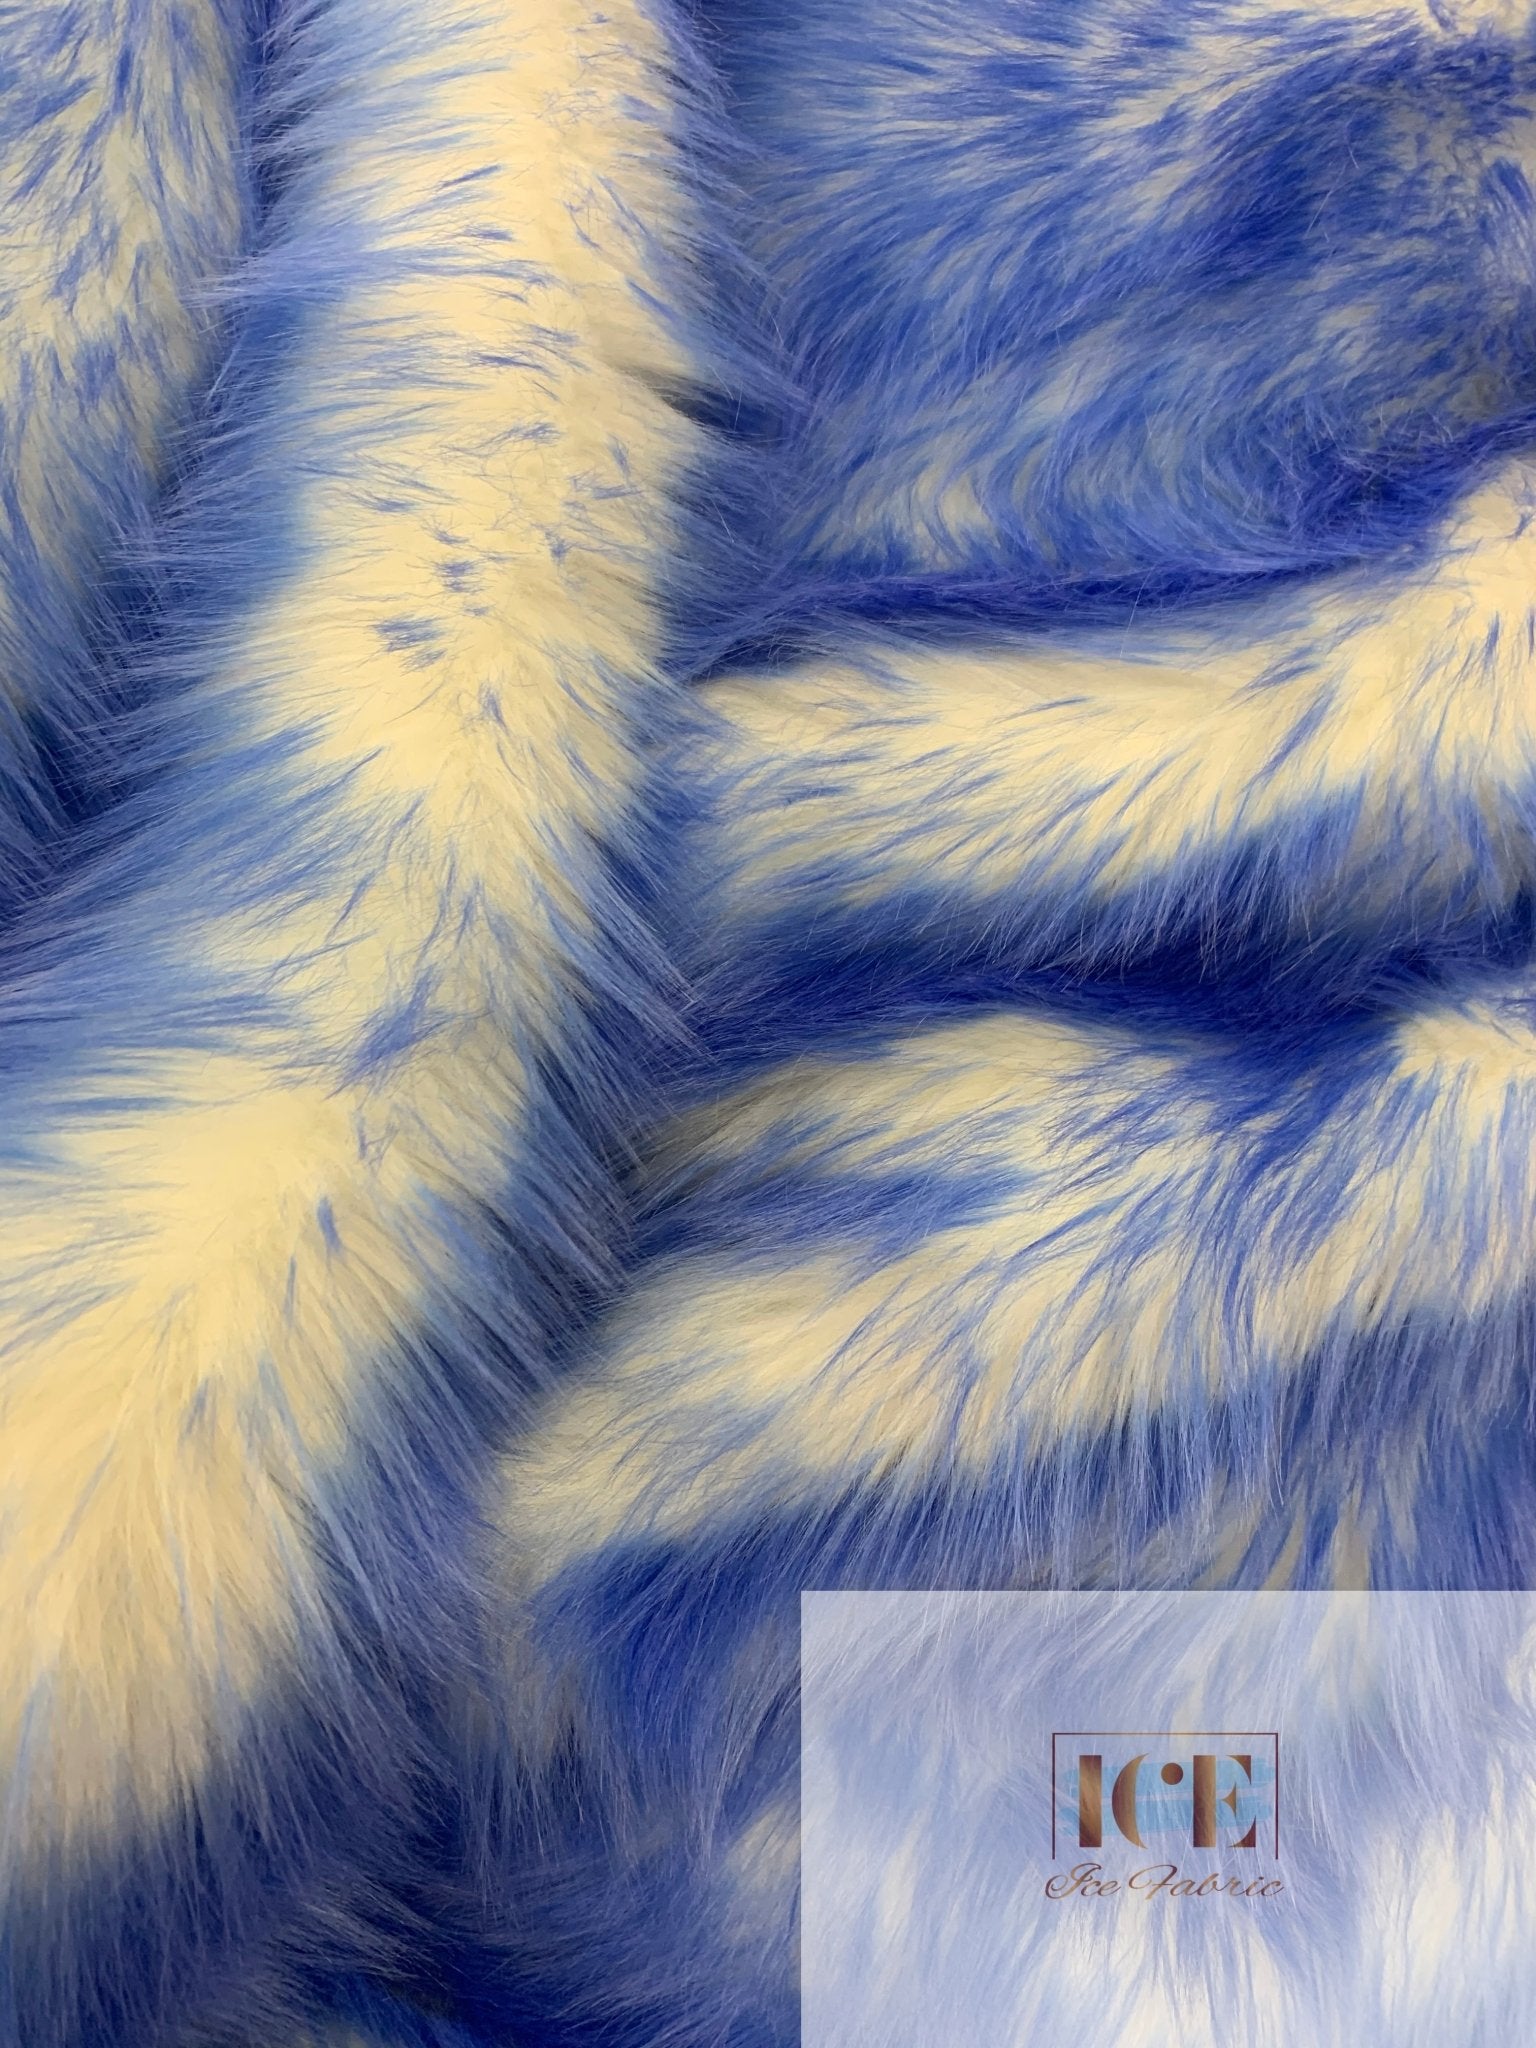 Canadian Fox 2 Tone Shaggy Long Pile Faux Fur Fabric For Blankets, Costumes, Bed SpreadICEFABRICICE FABRICSRoyal BlueBy The Yard (60 inches Wide)Canadian Fox 2 Tone Shaggy Long Pile Faux Fur Fabric For Blankets, Costumes, Bed Spread ICEFABRIC Royal Blue